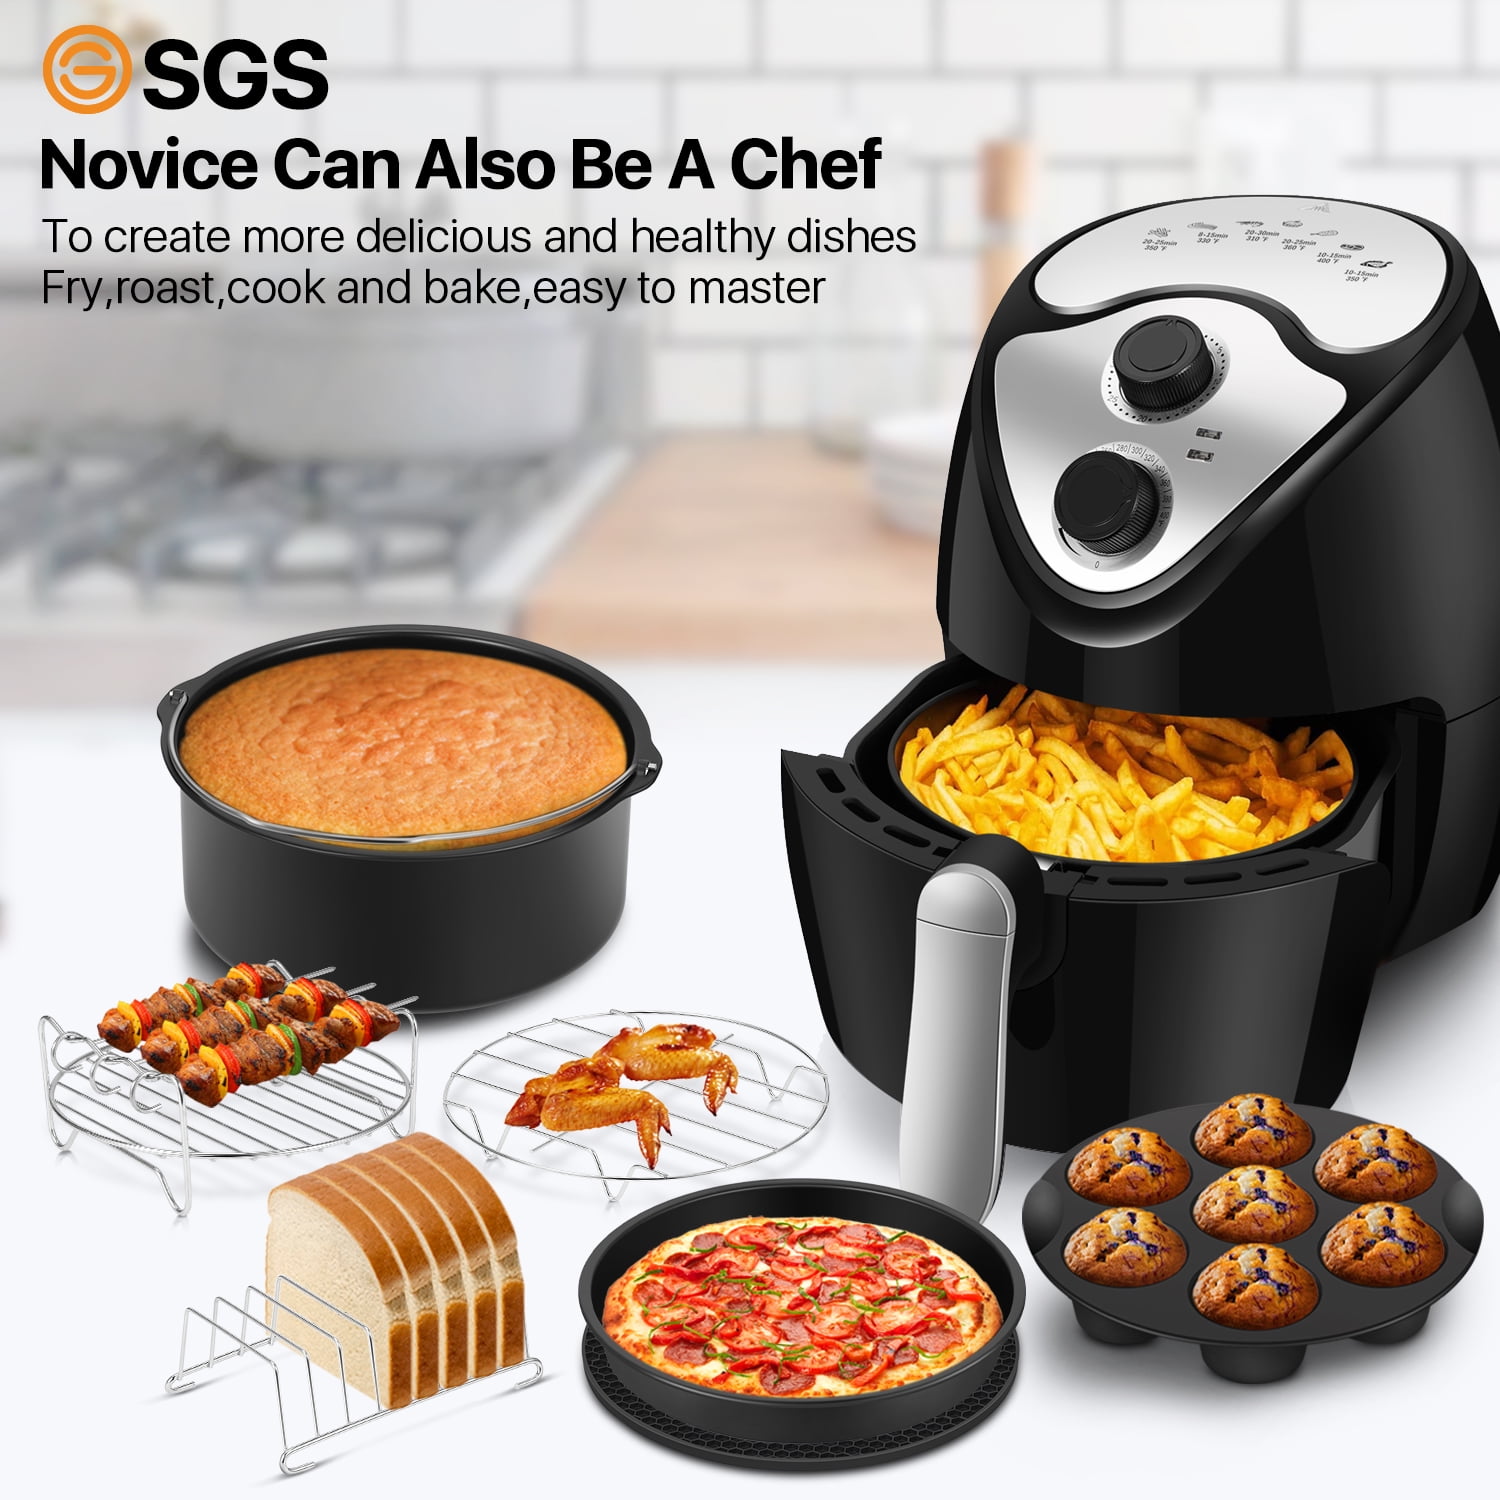 8 Inch Air Fryer Accessories Set of 10 for 3.5Qt-5.8Qt Phillips Nuwave  Gowise Gourmia Ninja Dash Air Fryer, with Egg Bites Mold, Pizza Pan, Cake